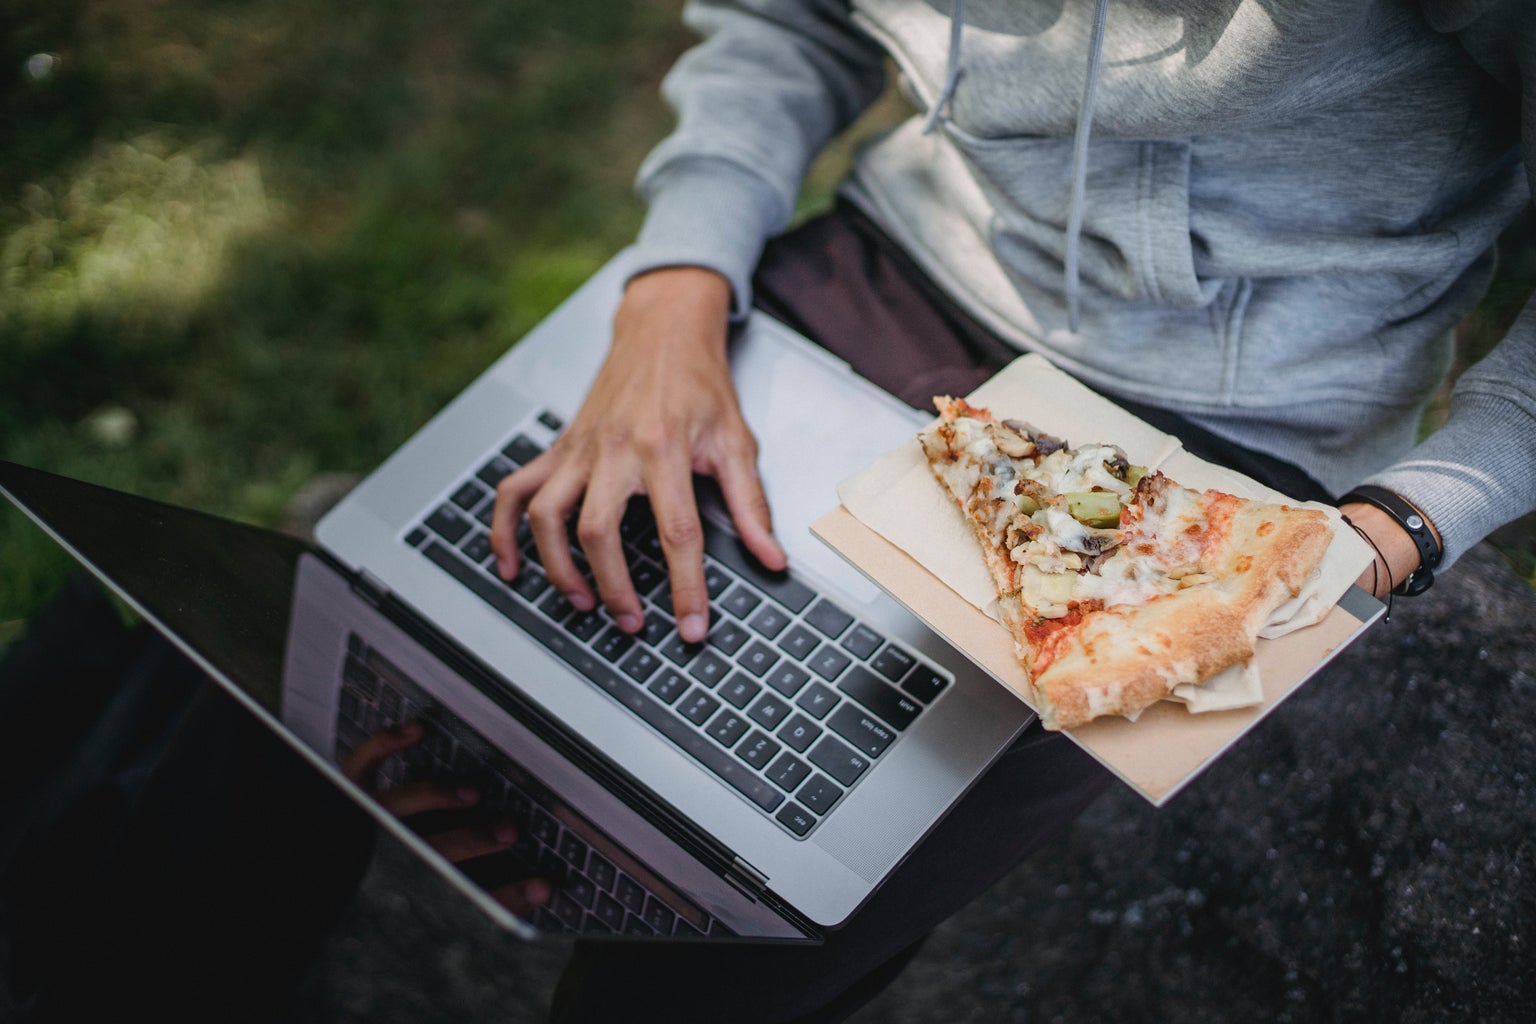 Guy holding pizza on computer.